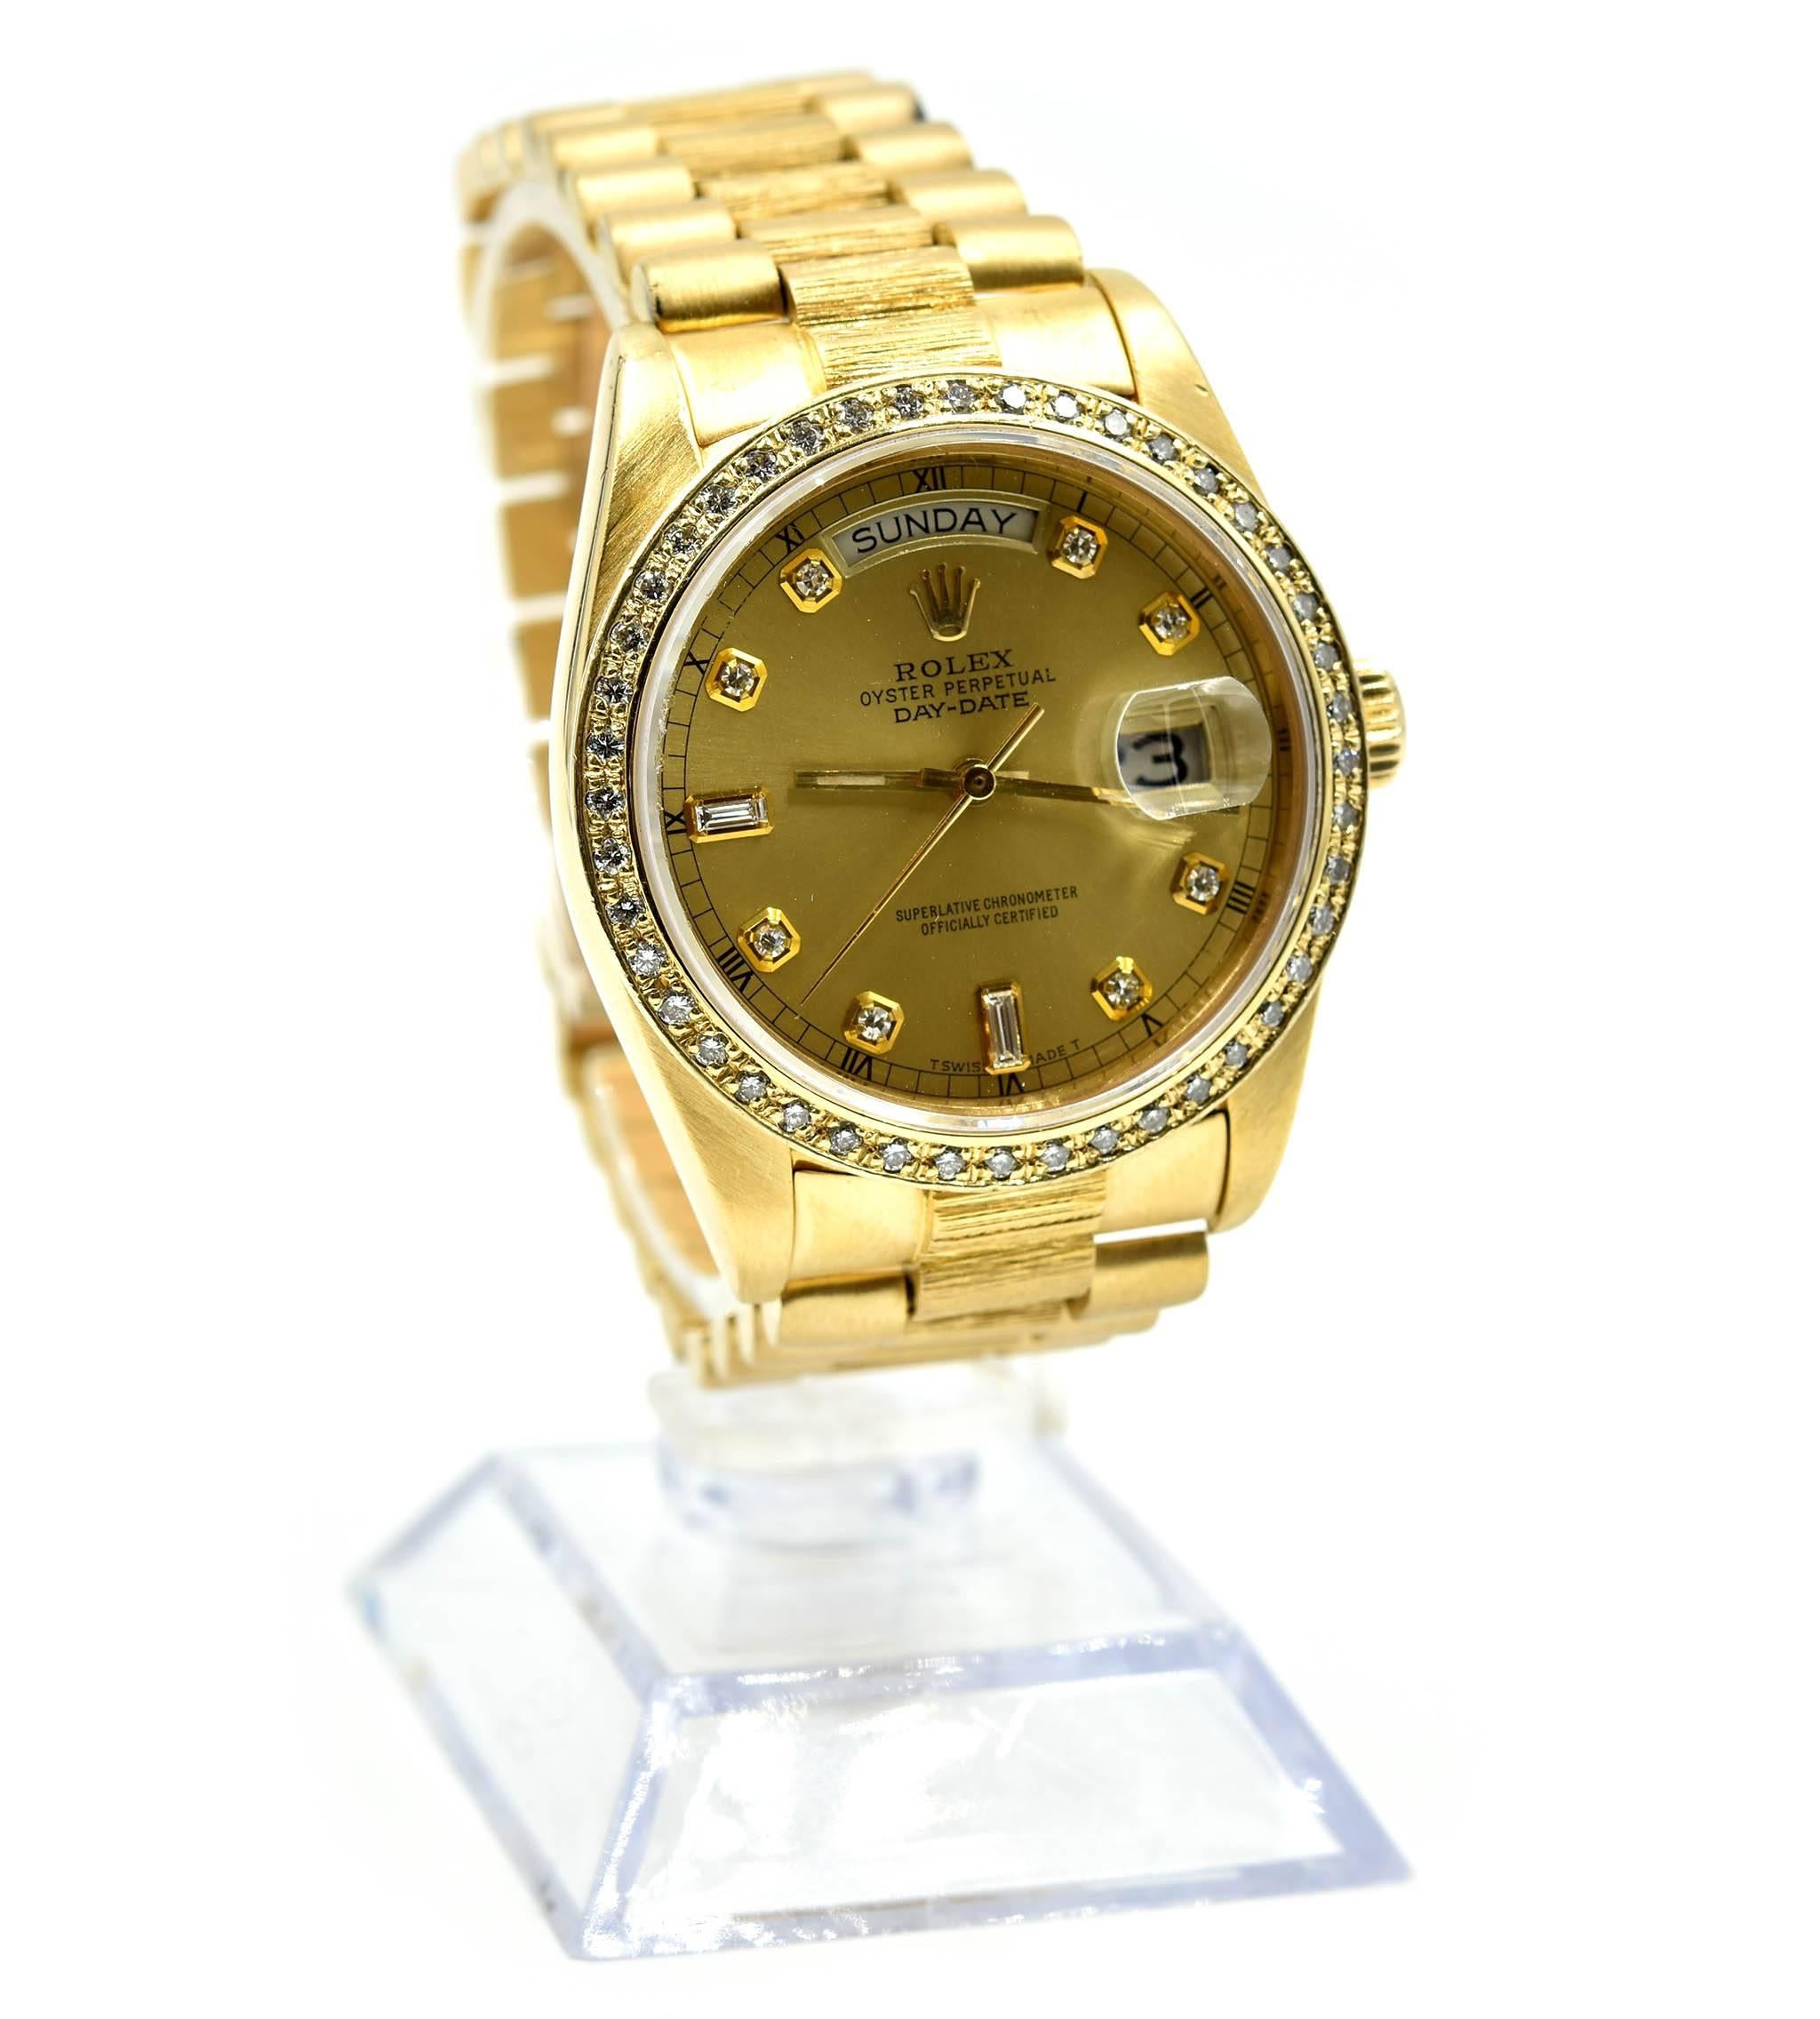 Movement: automatic
Function: hours, minutes, seconds, date
Case: round 36mm 18k yellow gold case, custom diamond bezel, scratch resistant sapphire crystal, screw down crown, water resistant to 100 meters
Band: 18k yellow gold bark finish bracelet